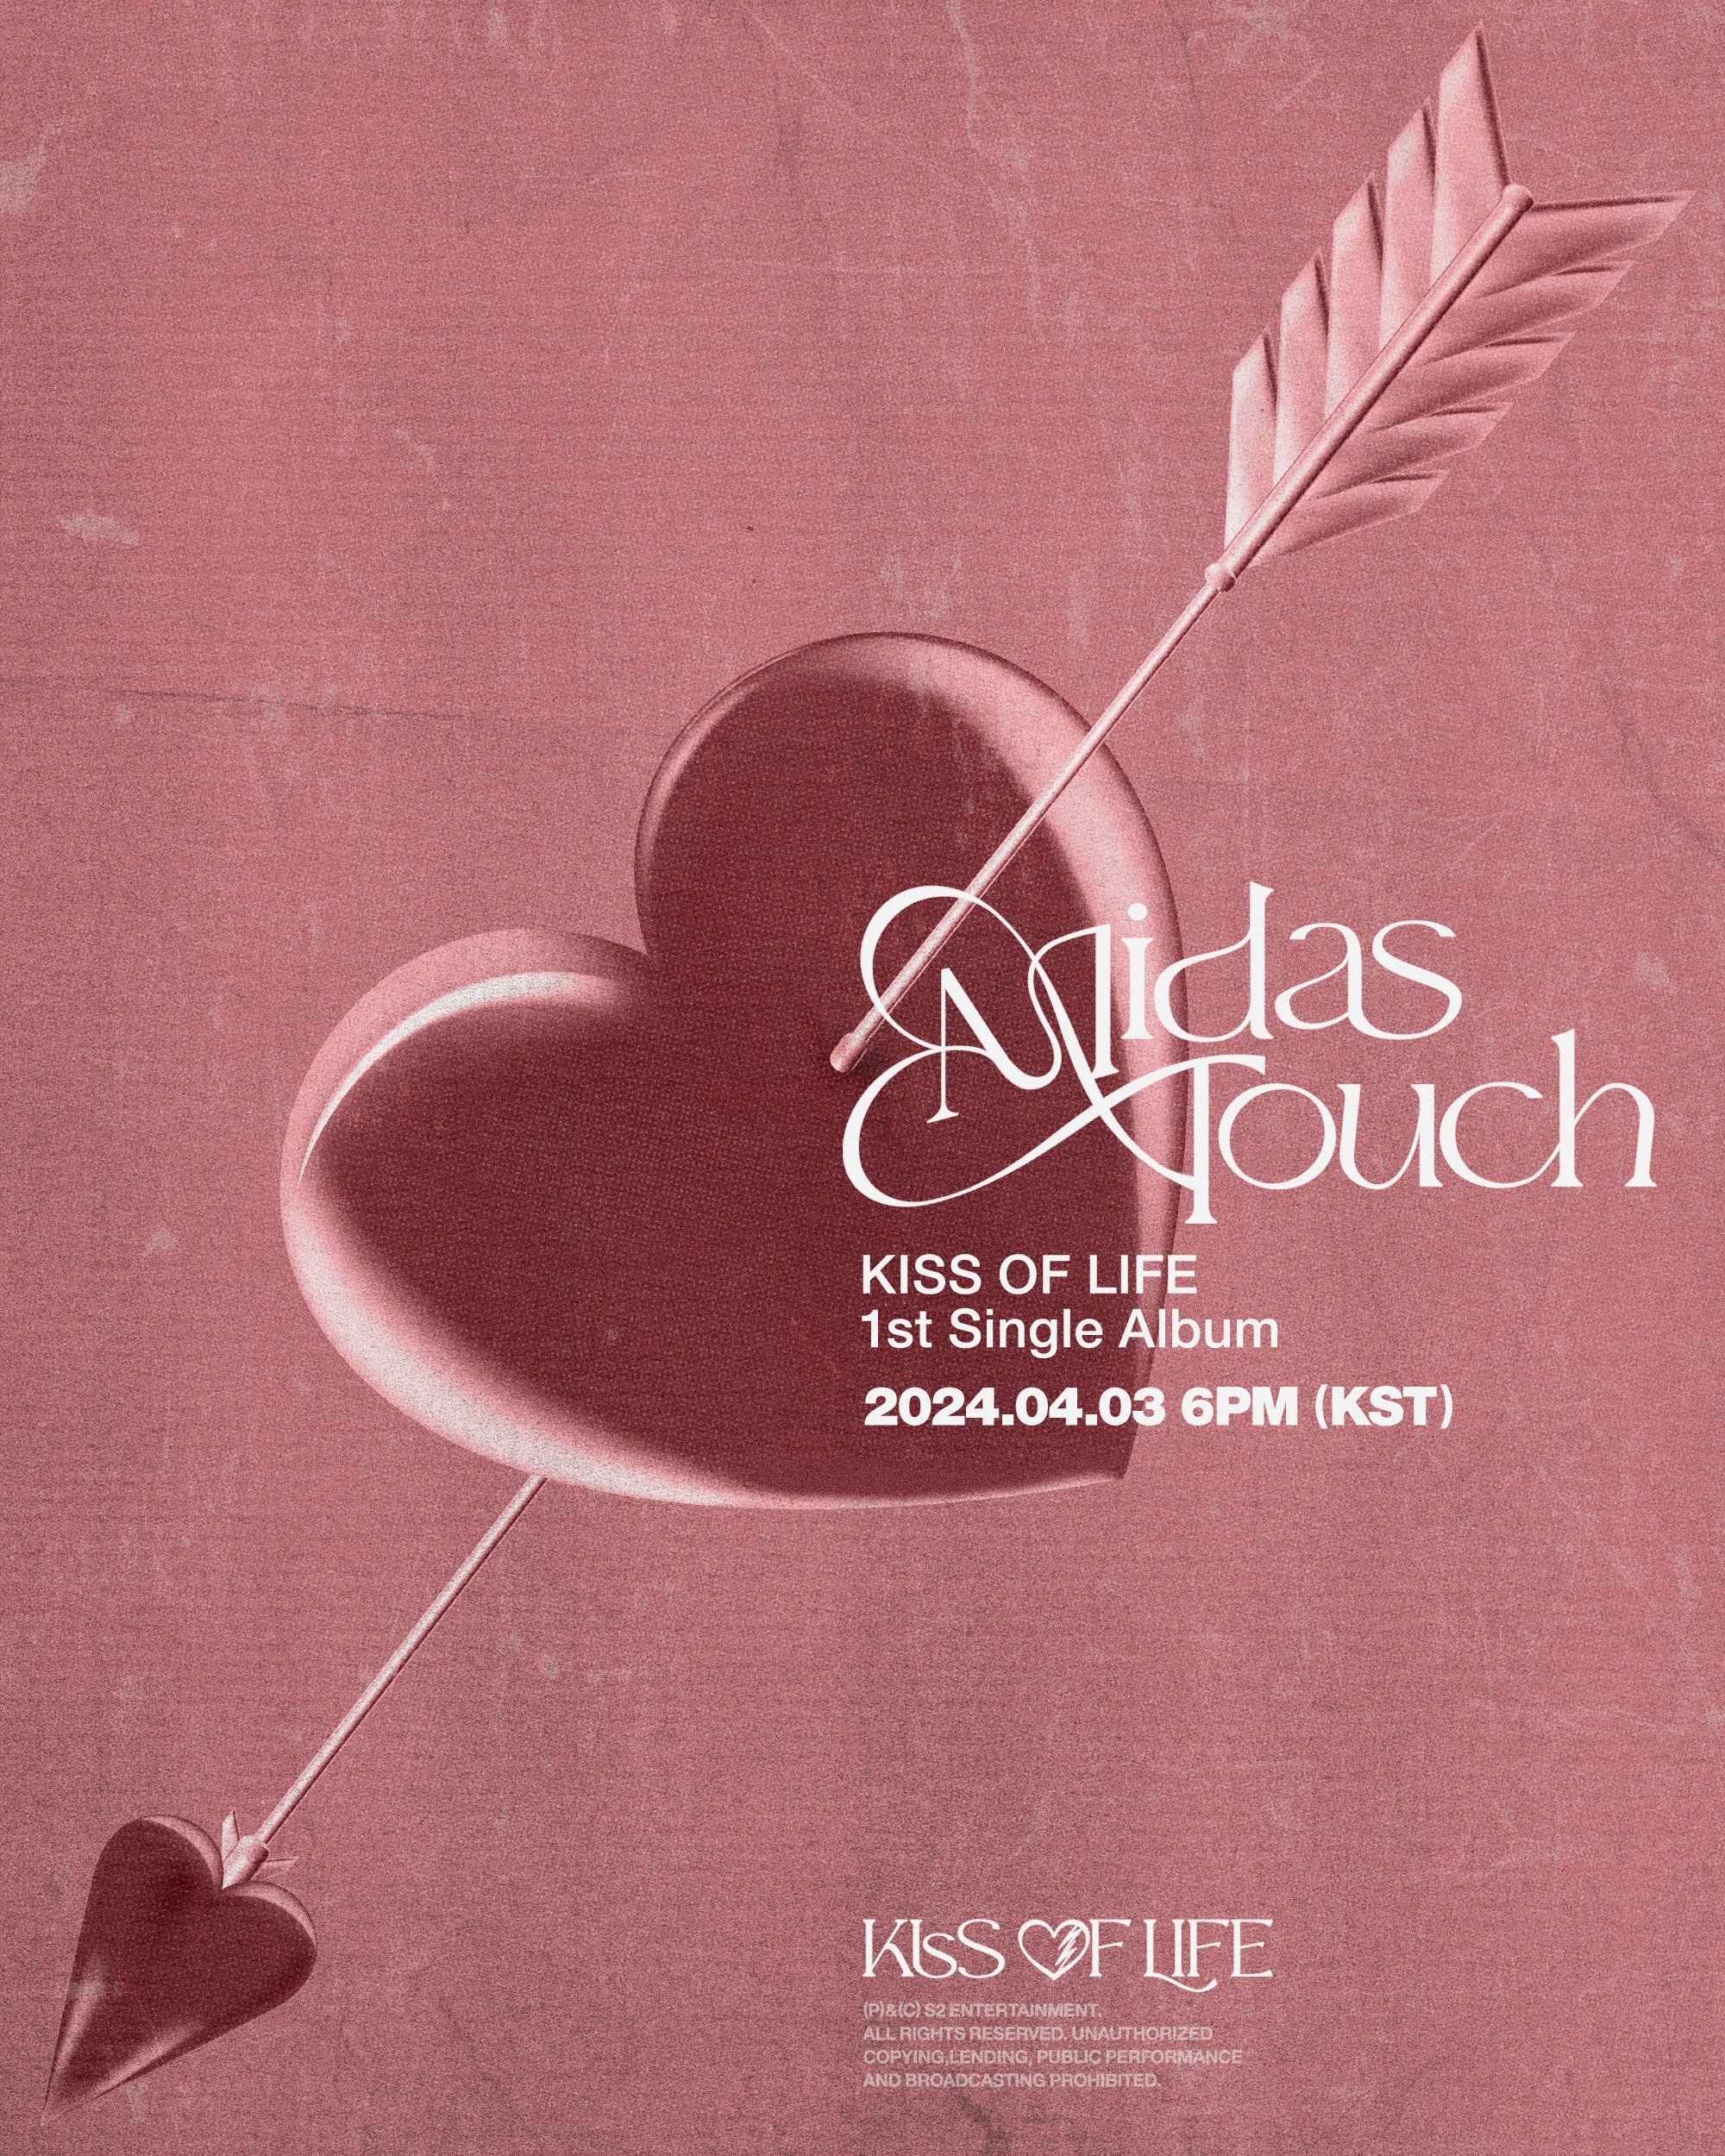 KISS OF LIFE Announces Comeback With “Midas Touch”